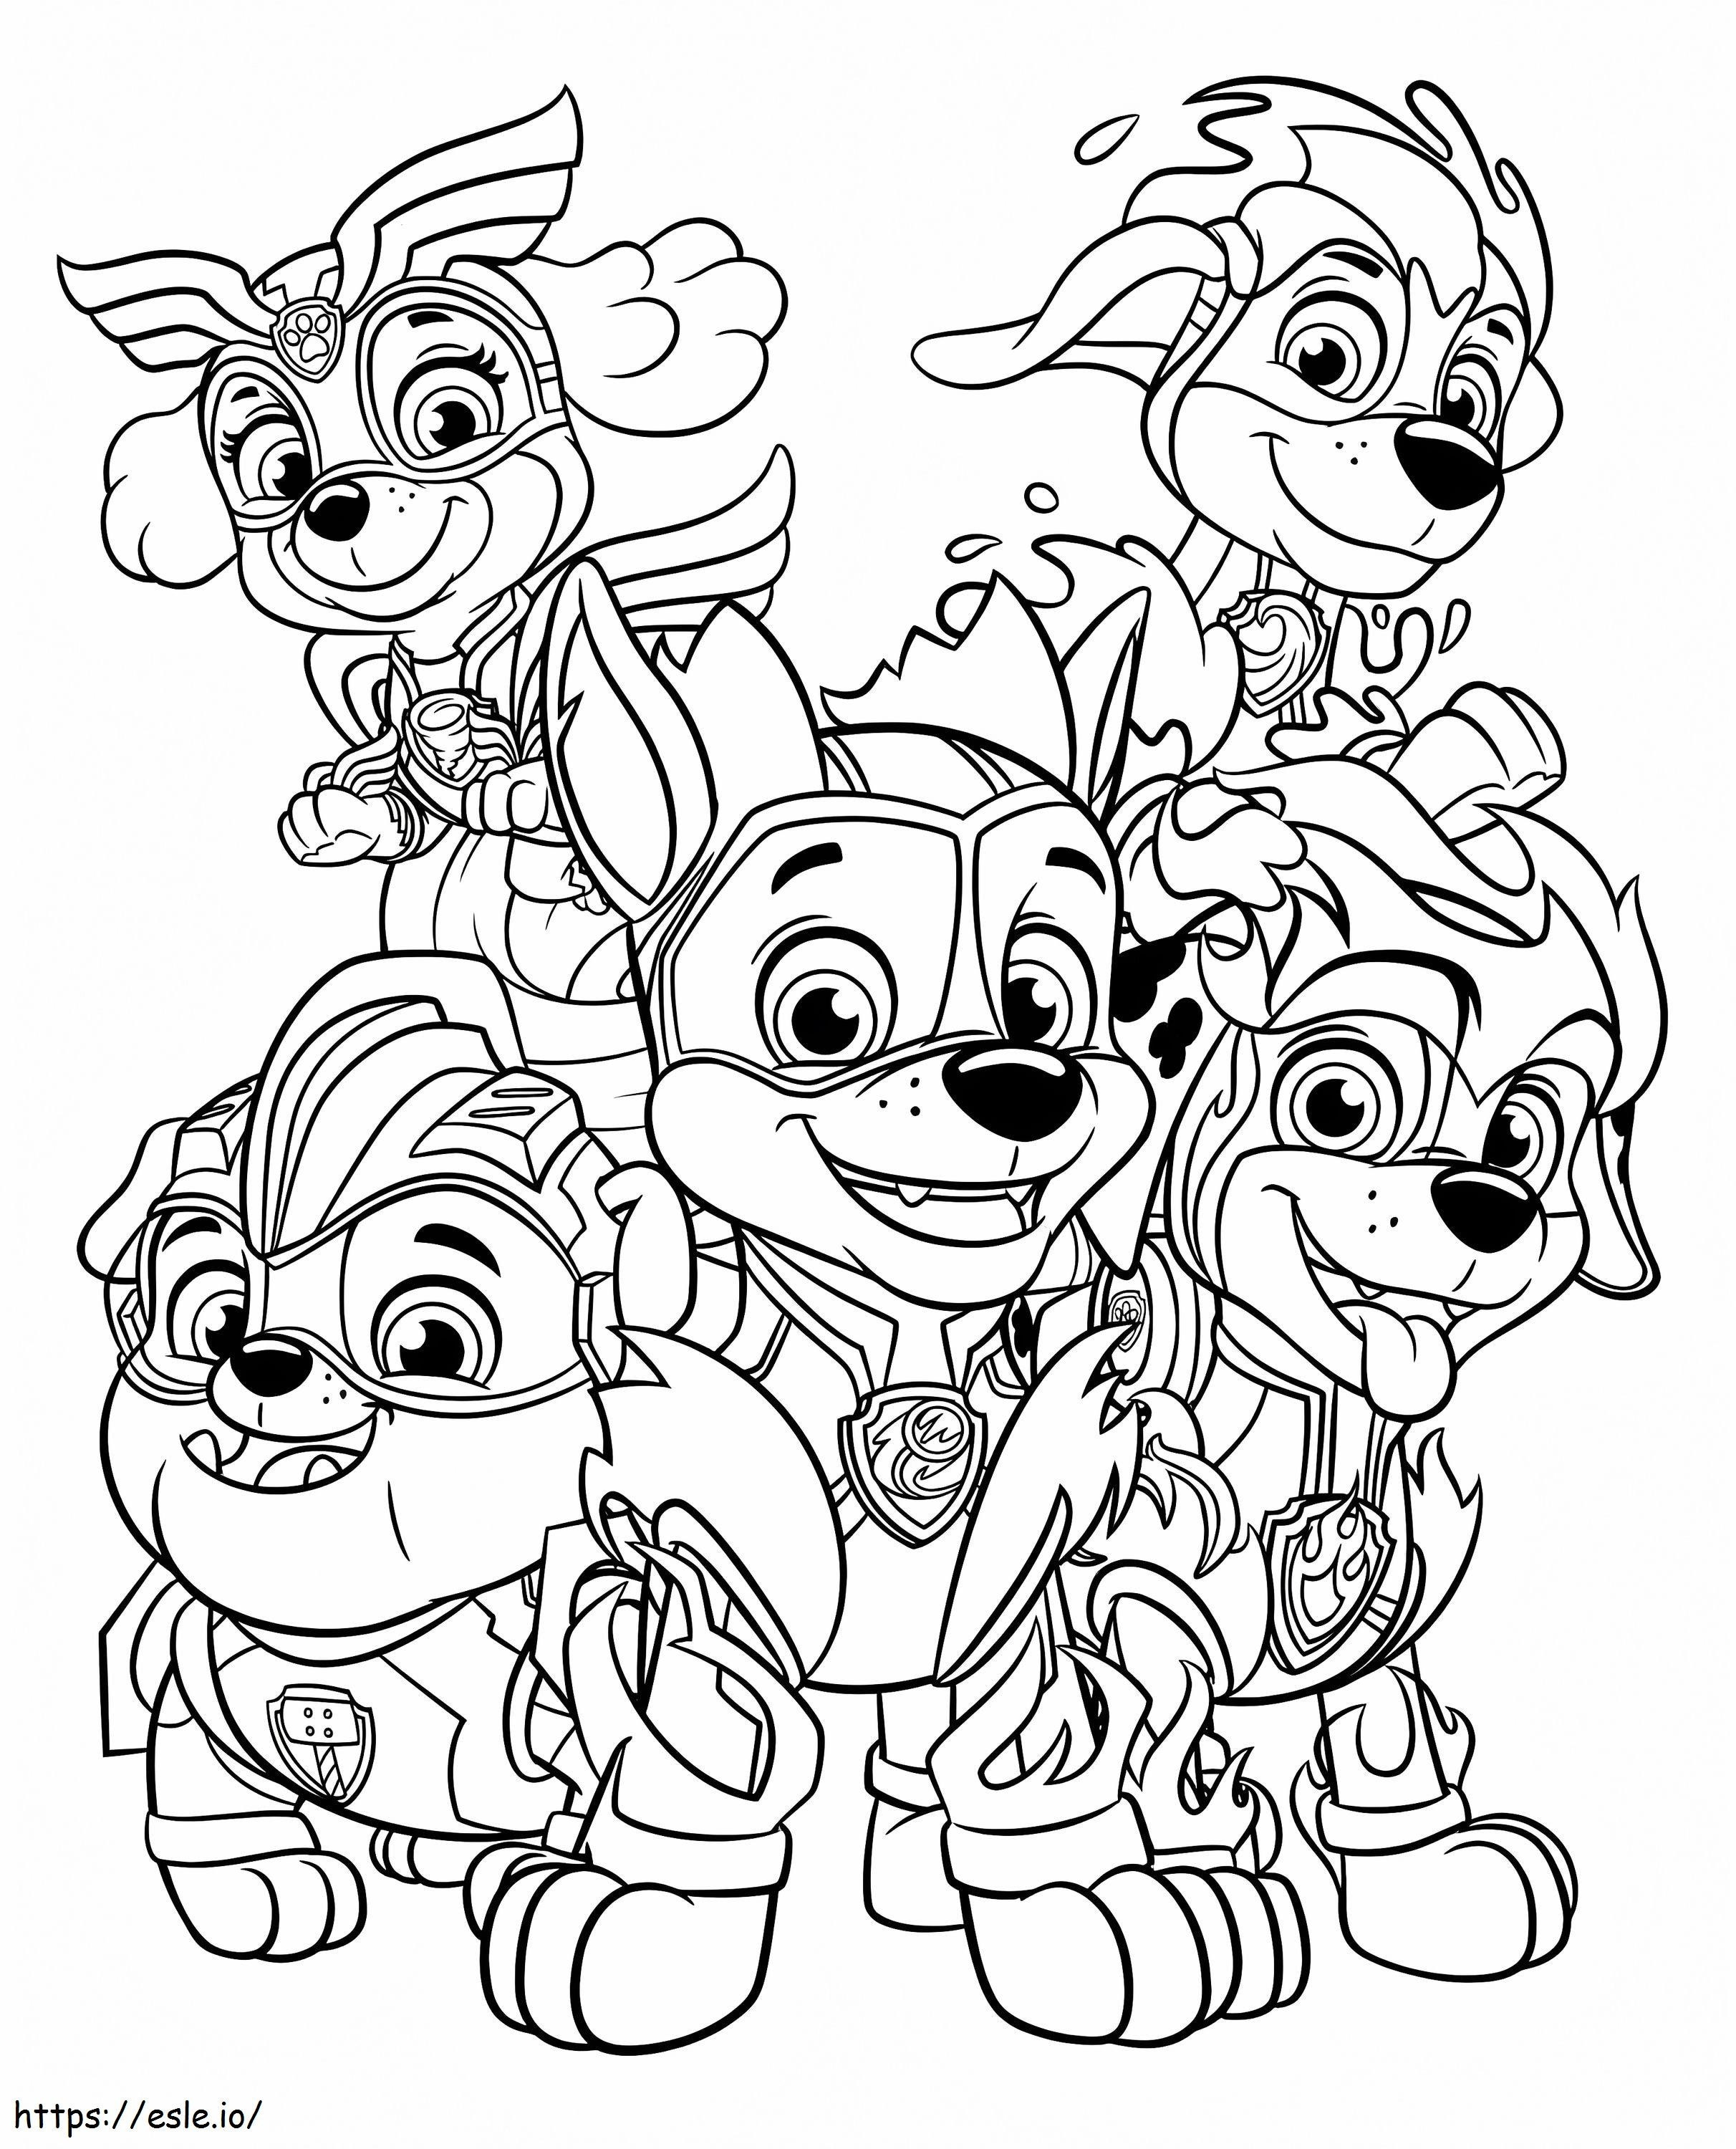 Mighty Pups coloring page